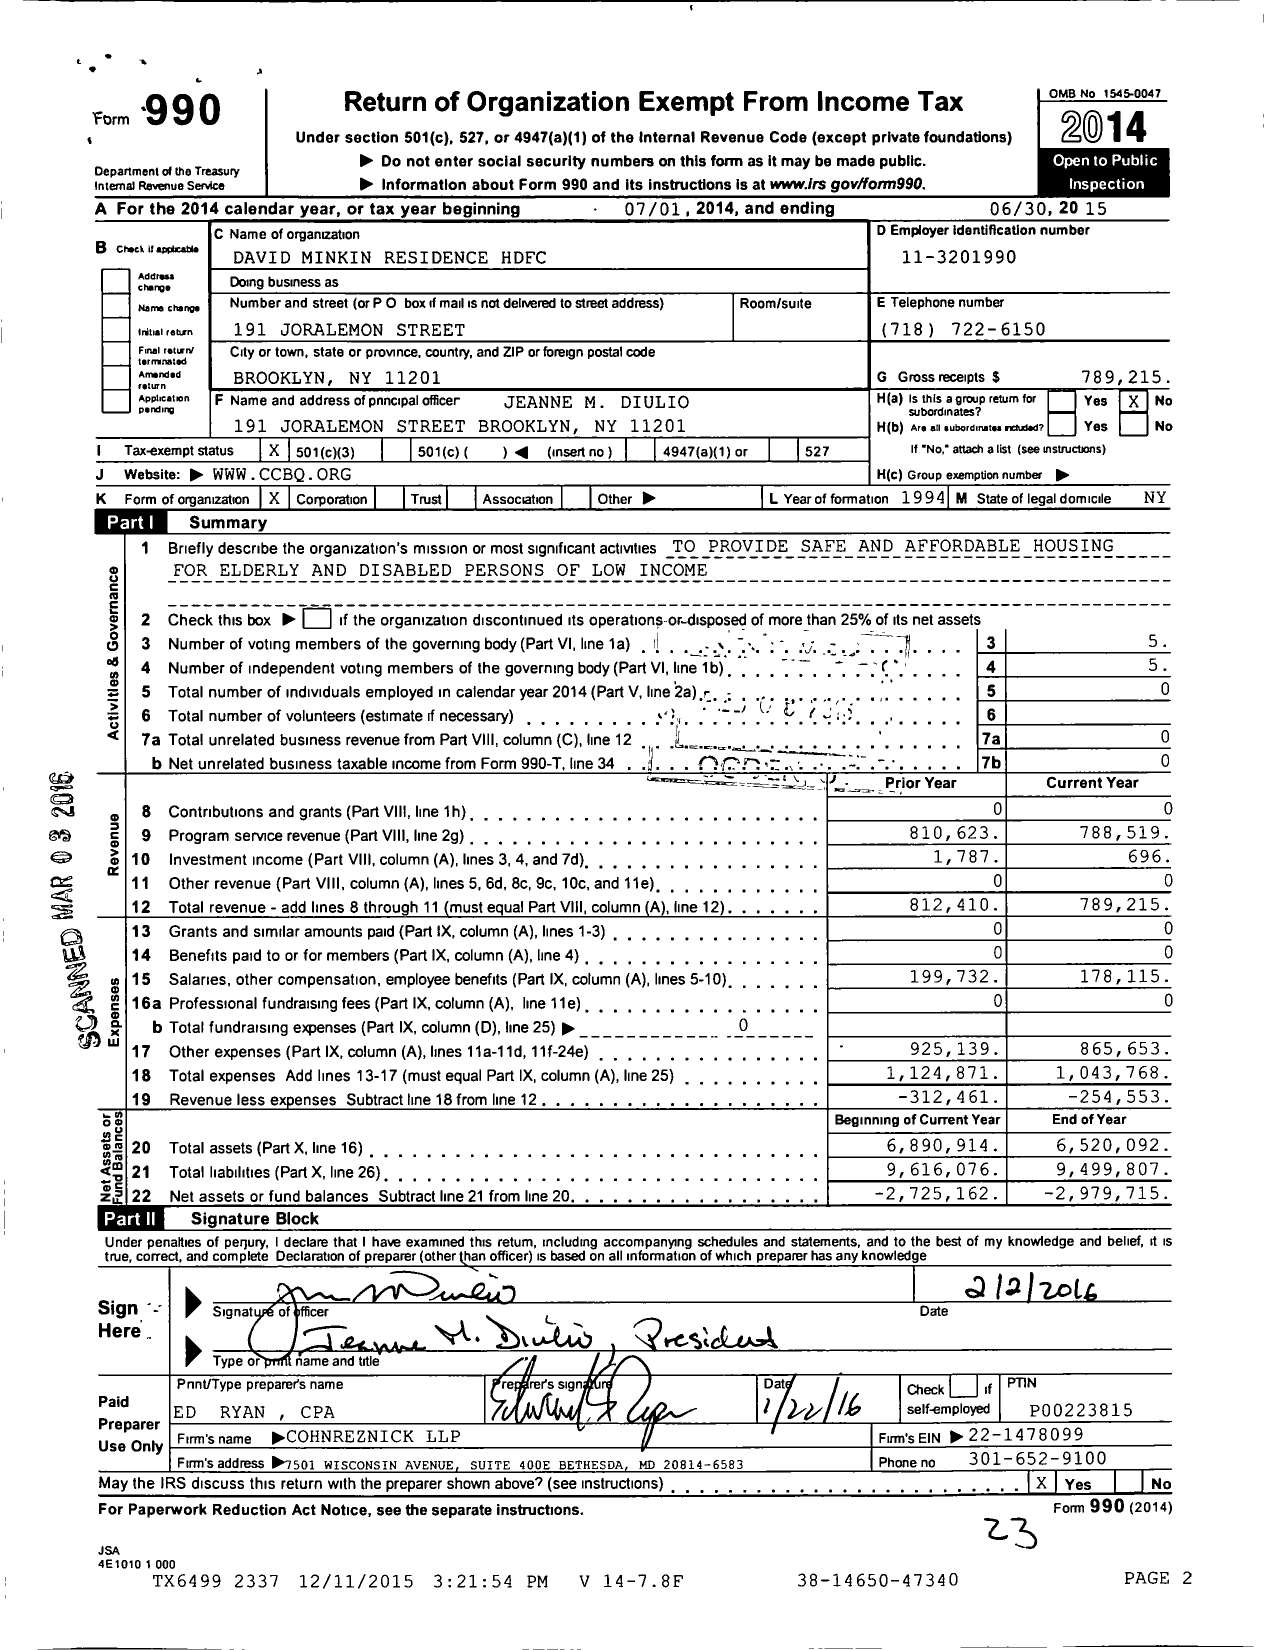 Image of first page of 2014 Form 990 for David Minkin Residence HDFC